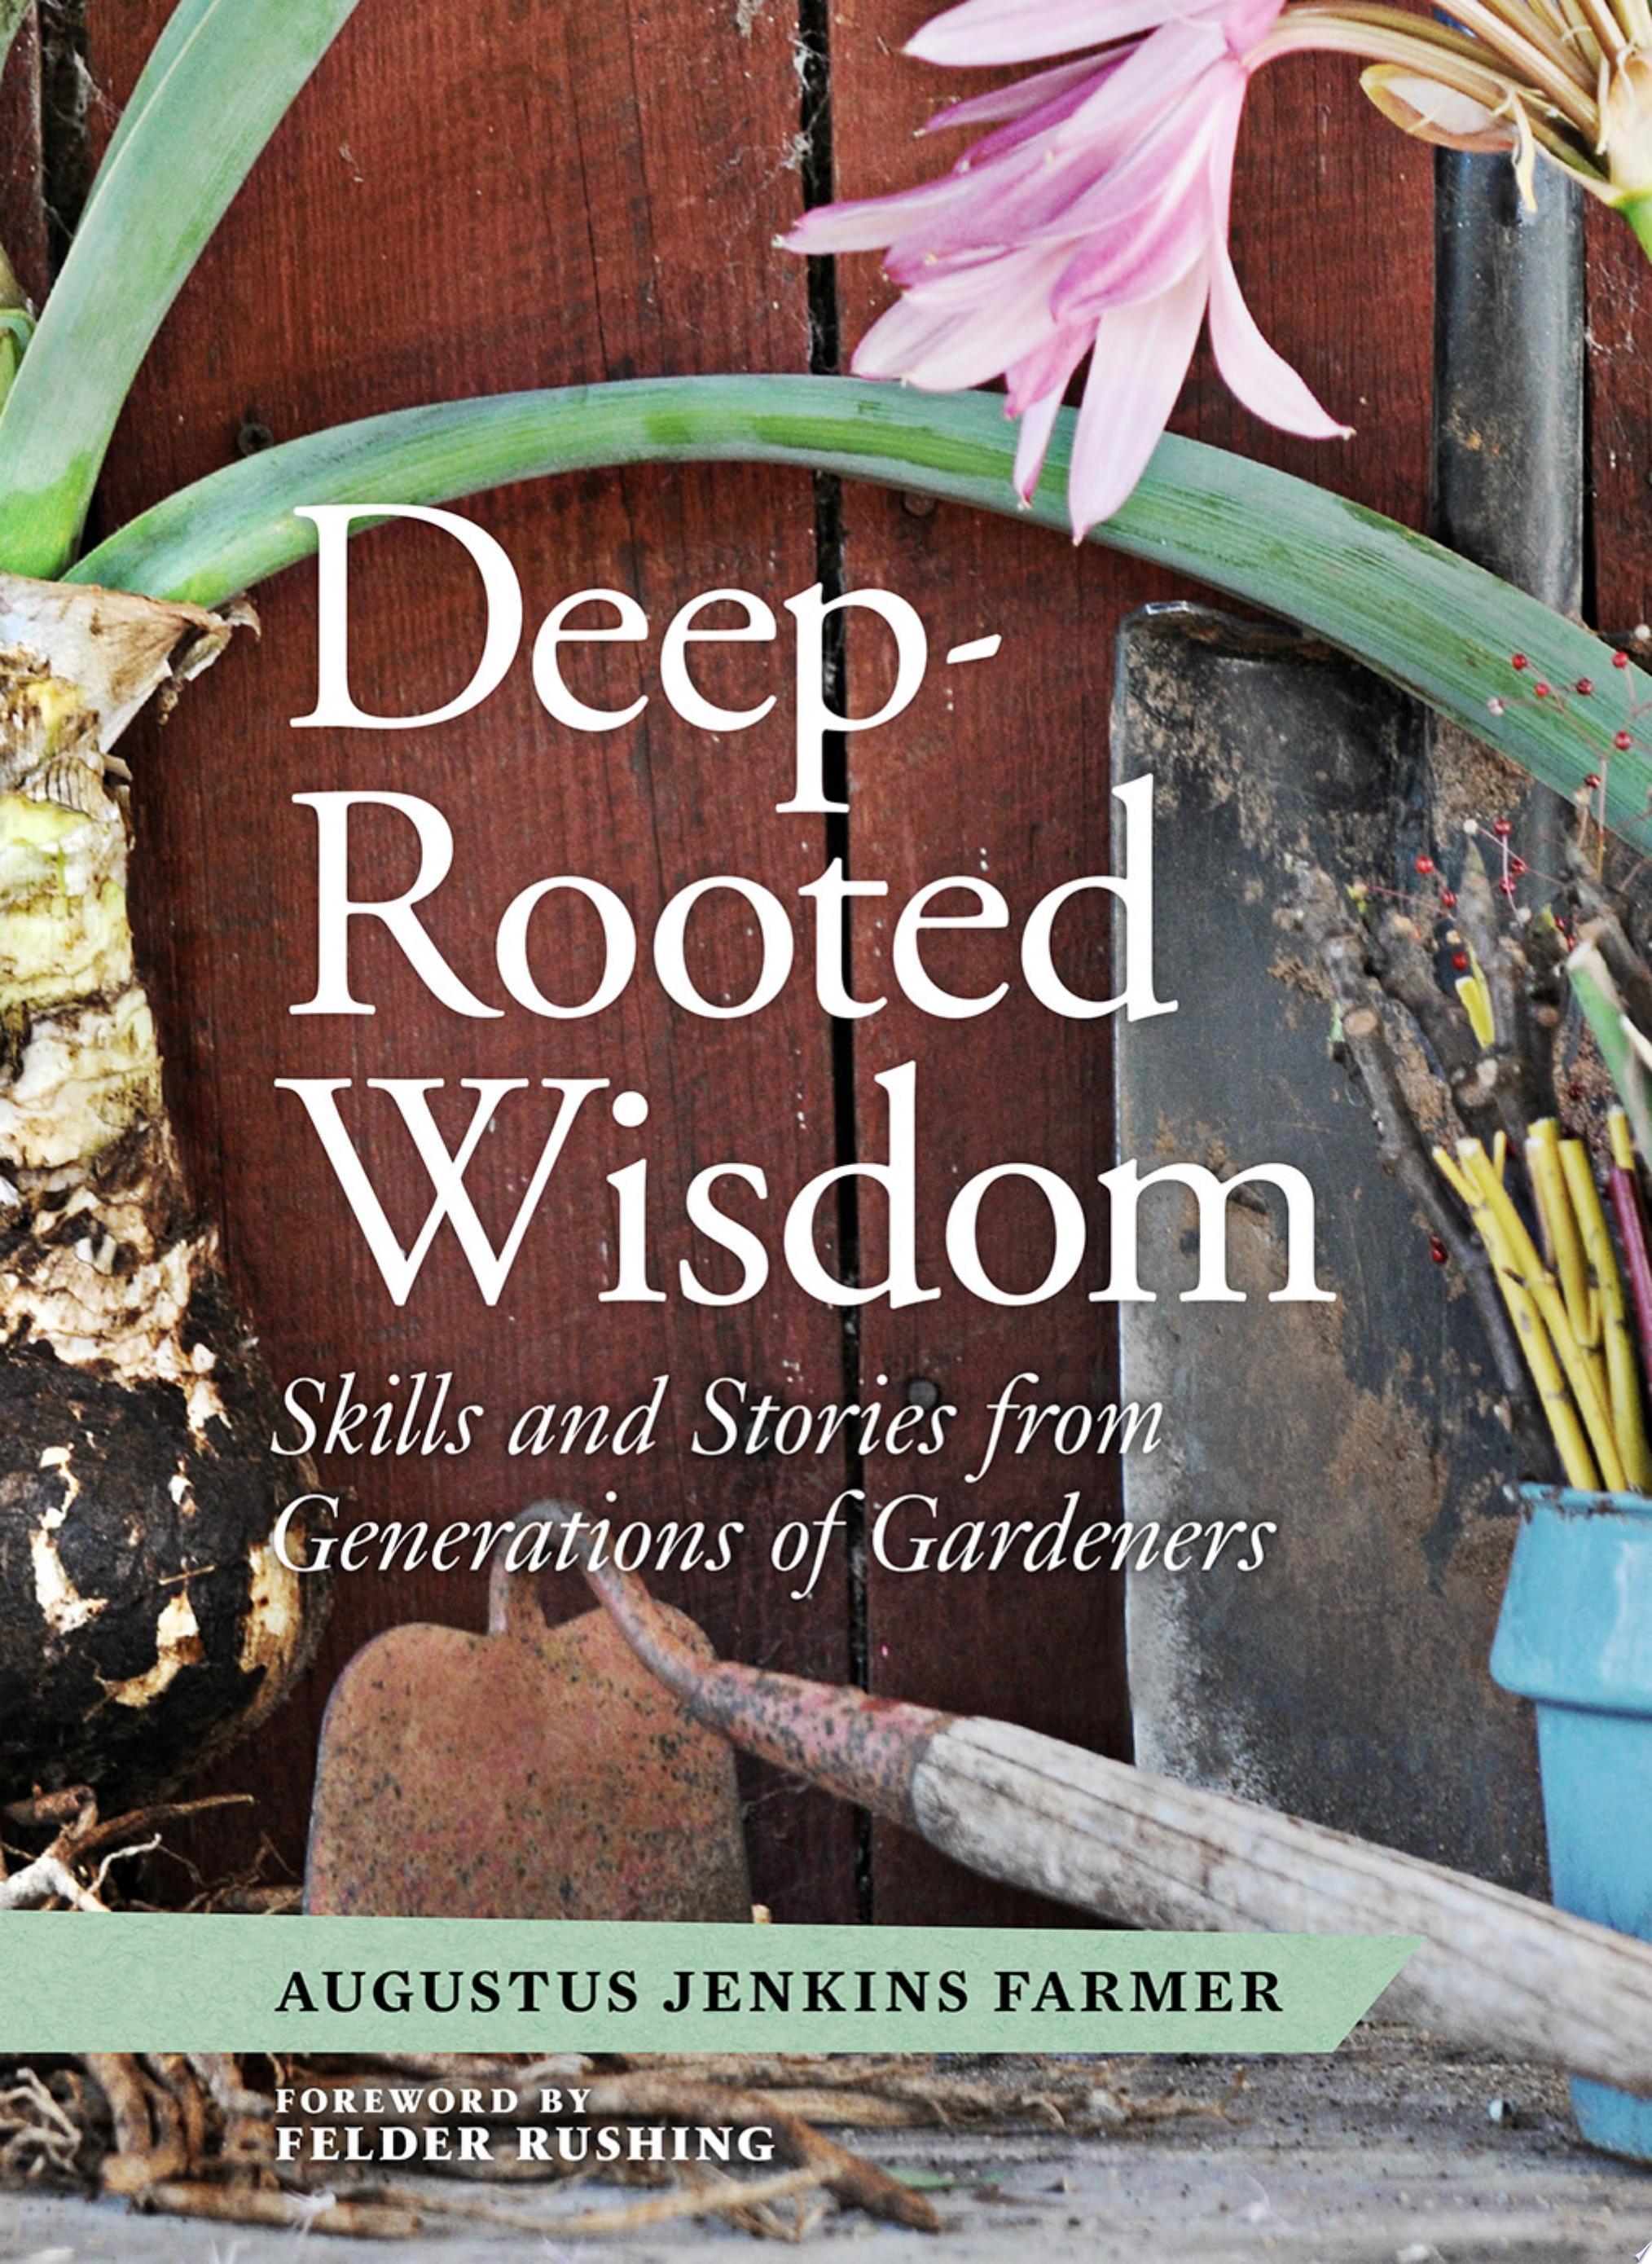 Image for "Deep-Rooted Wisdom"